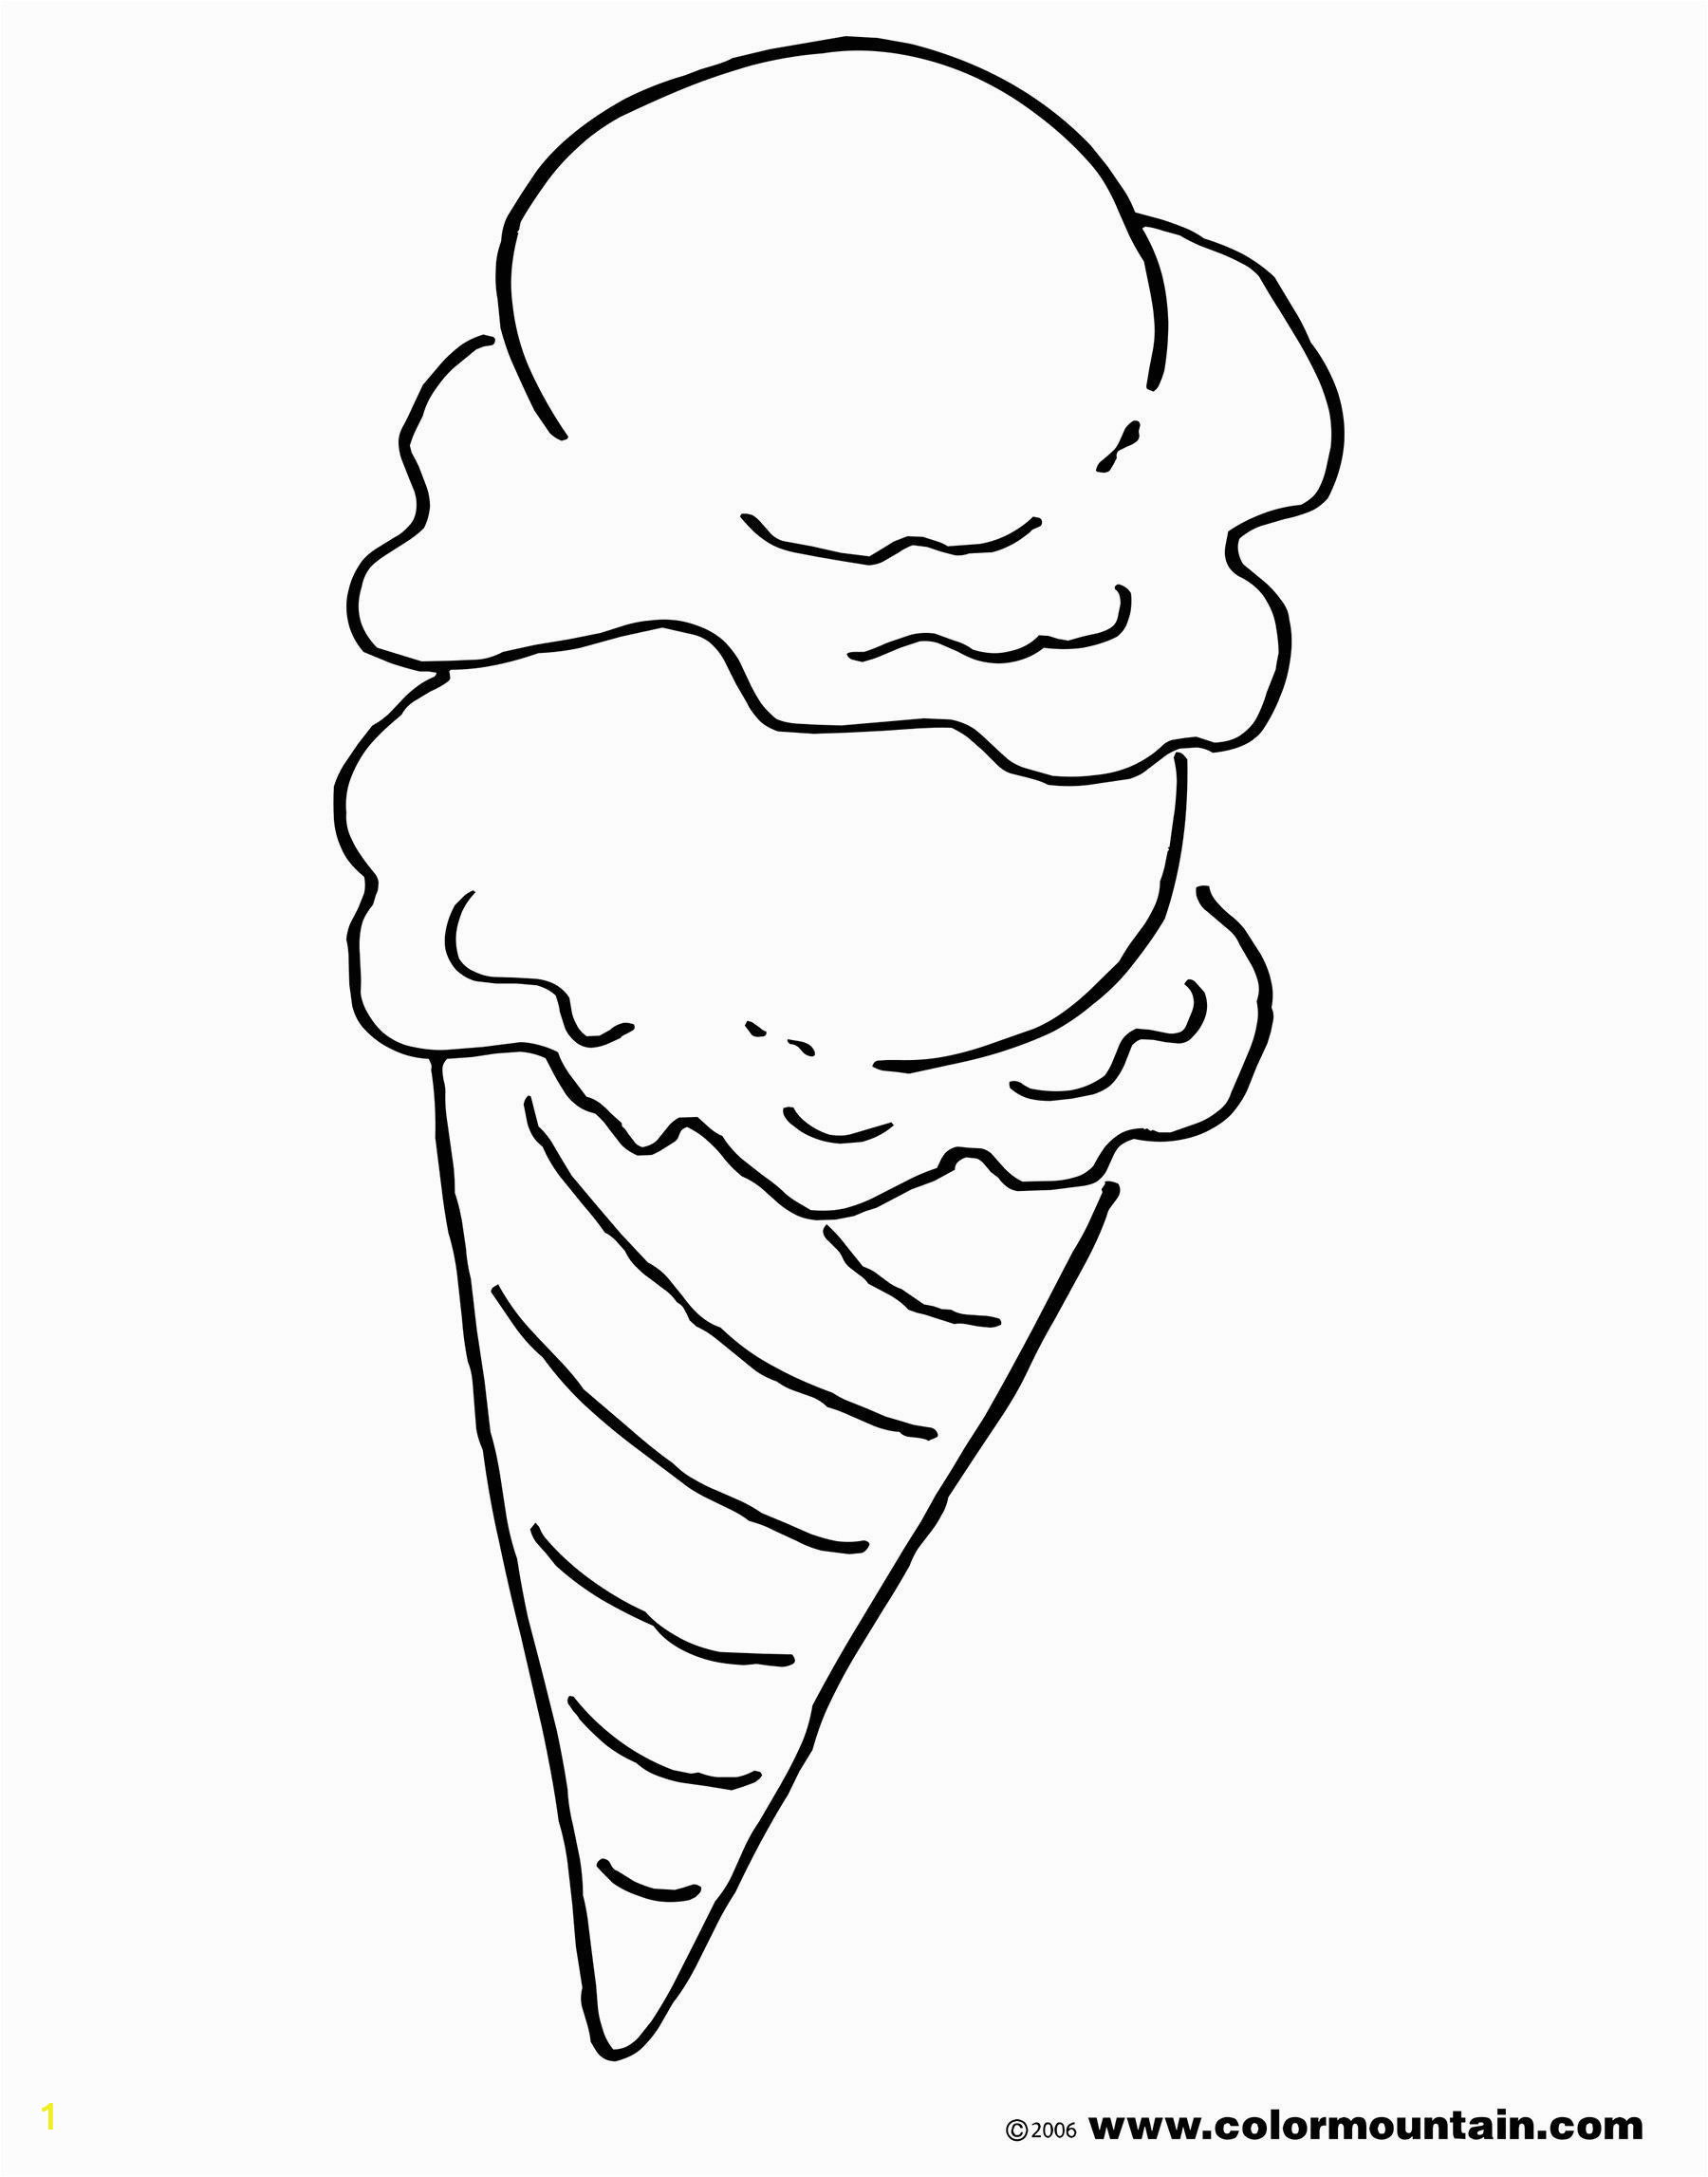 Coloring Pages Ice Cream Printable New Ice Cream Colouring Pages Coloring Coloringpages